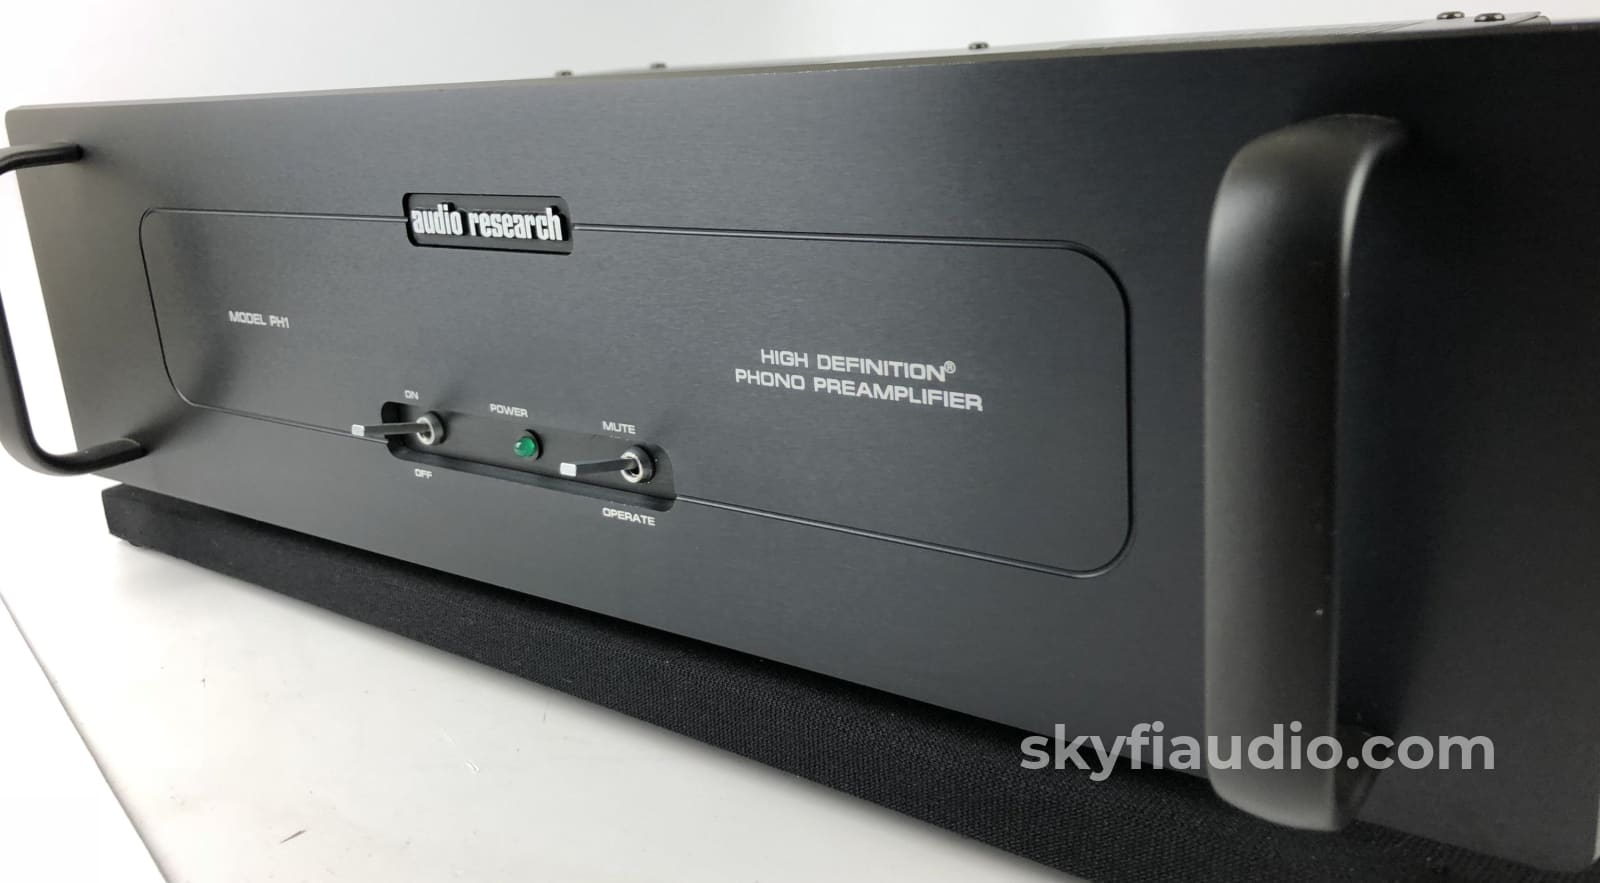 Audio Research Ph1 Phono Preamp Preamplifier